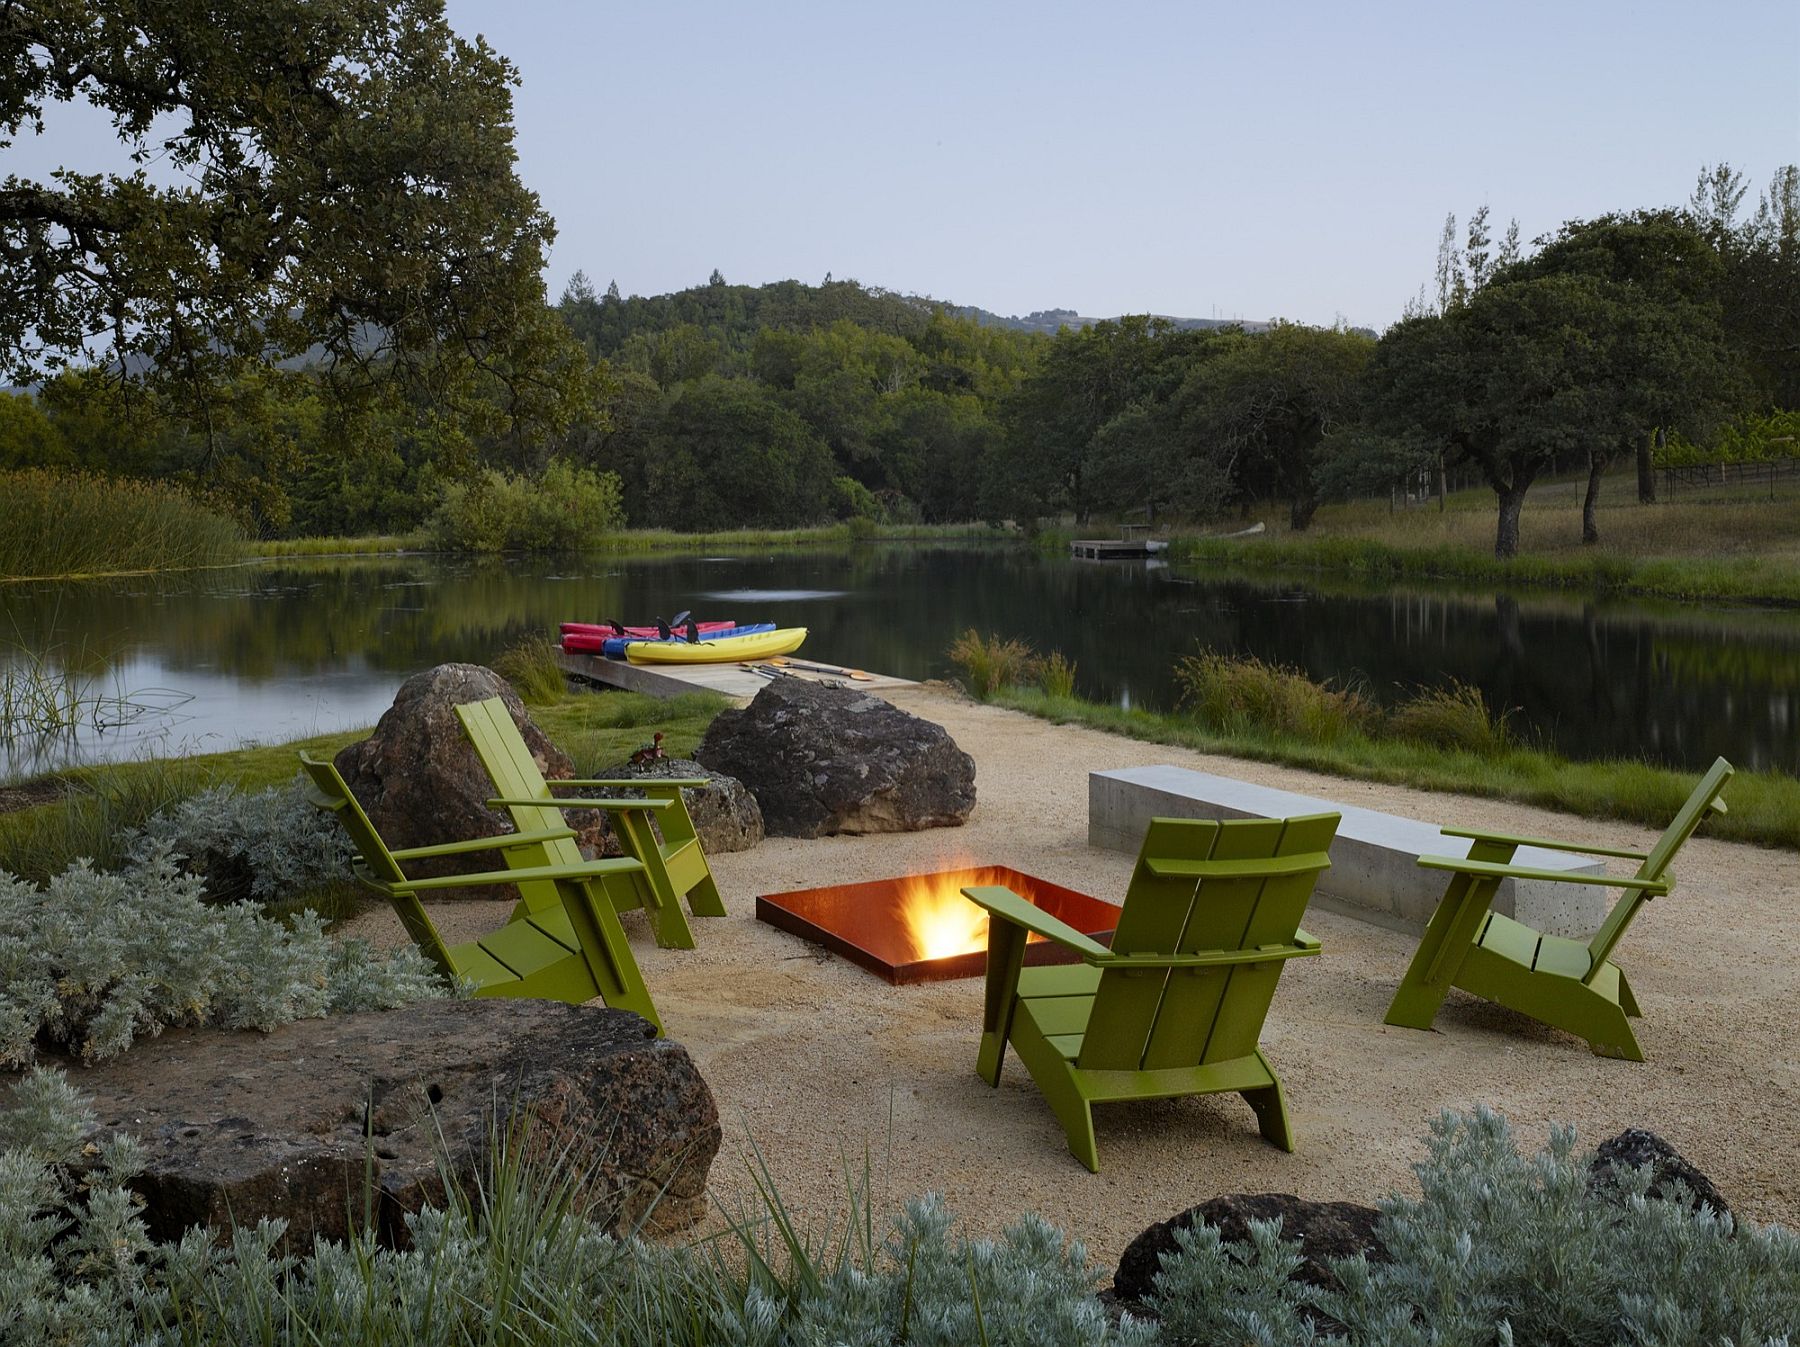 Firepit and informal seating on the edge of the natural pond and spring